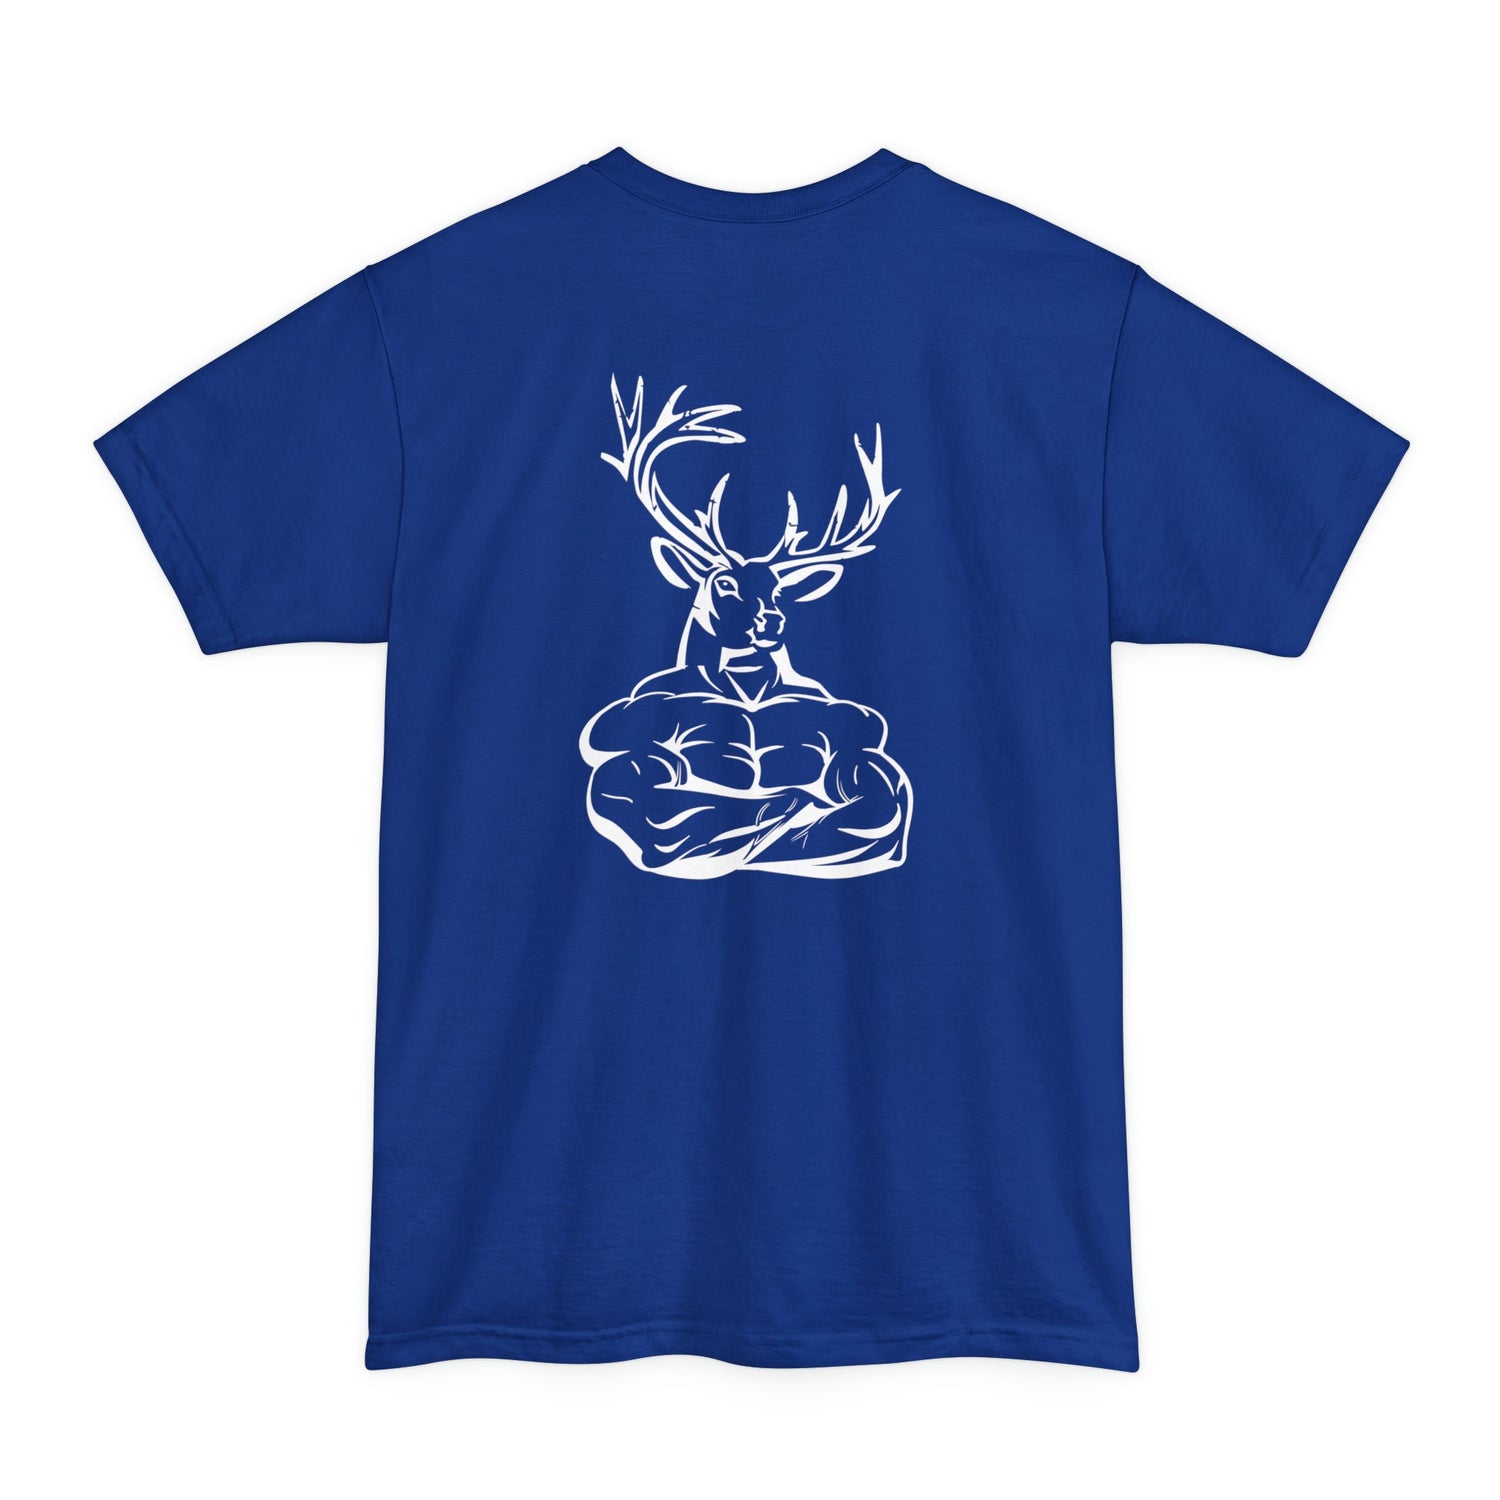 Big and tall deer hunting t-shirt, color blue, front design placement